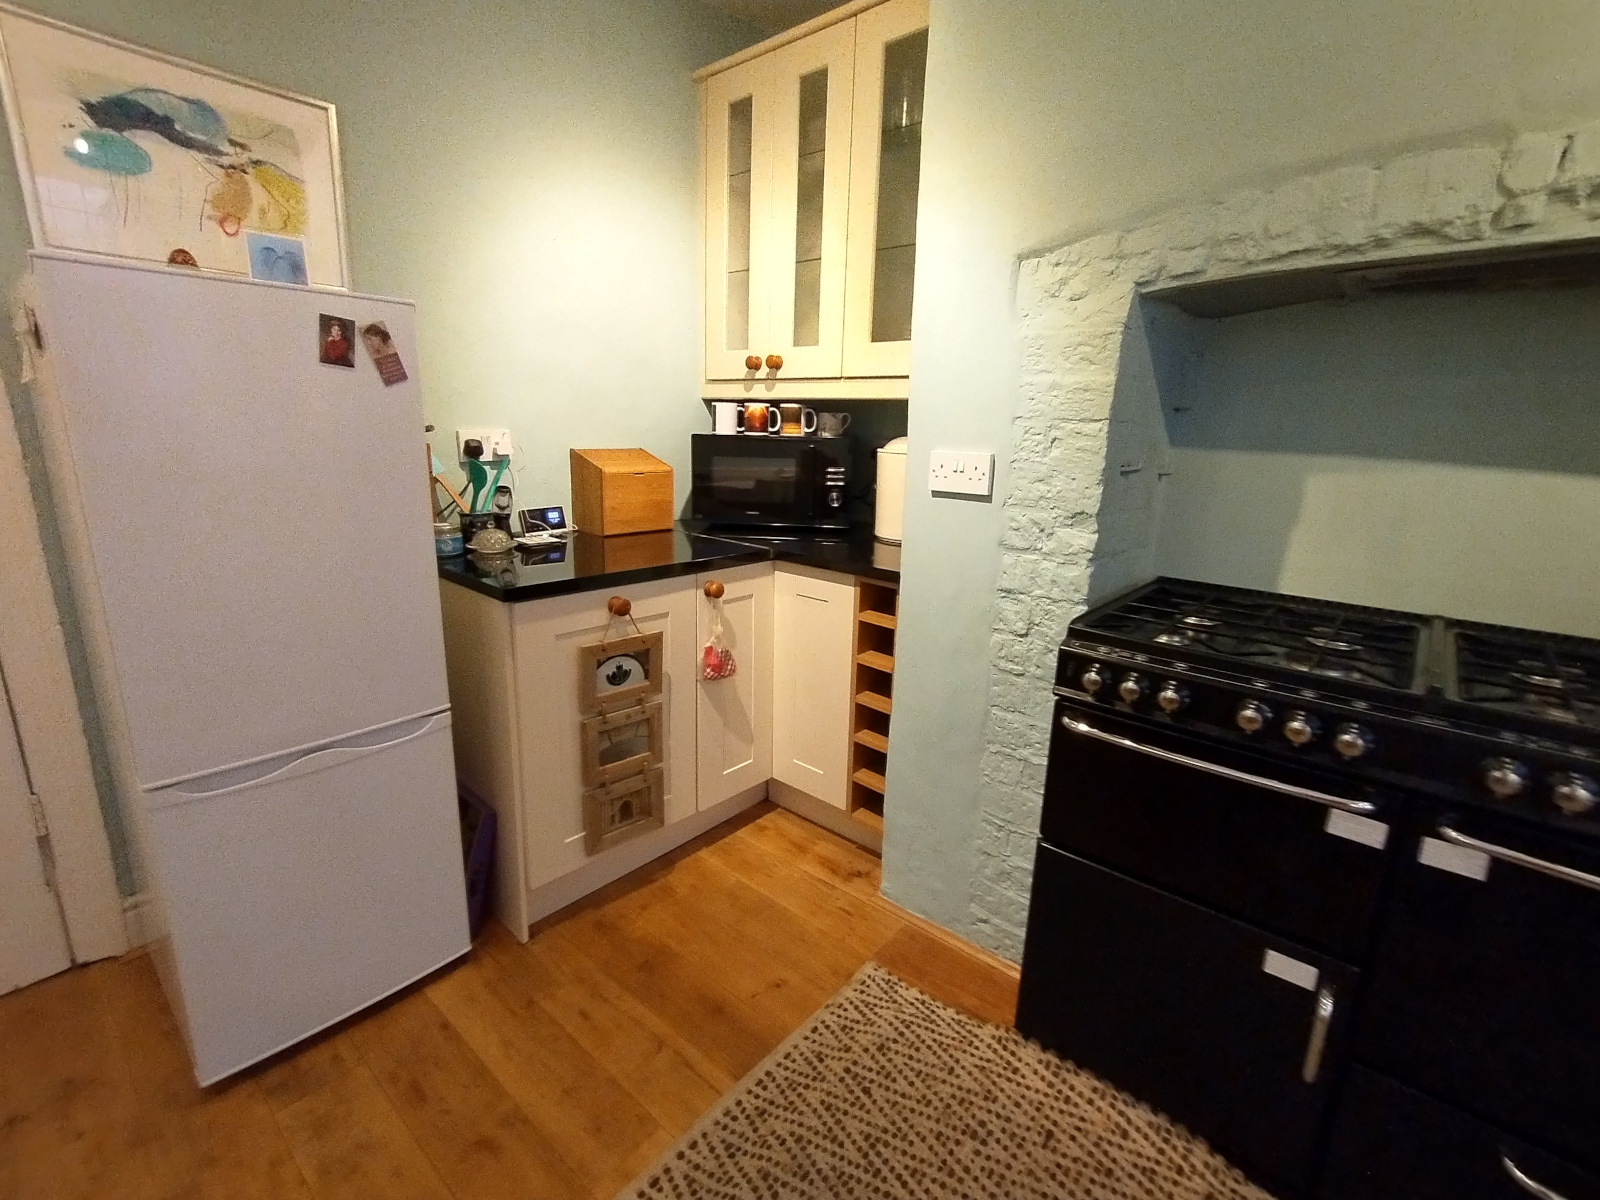 The cottage's kitchen, with cooker, fridge and microwave